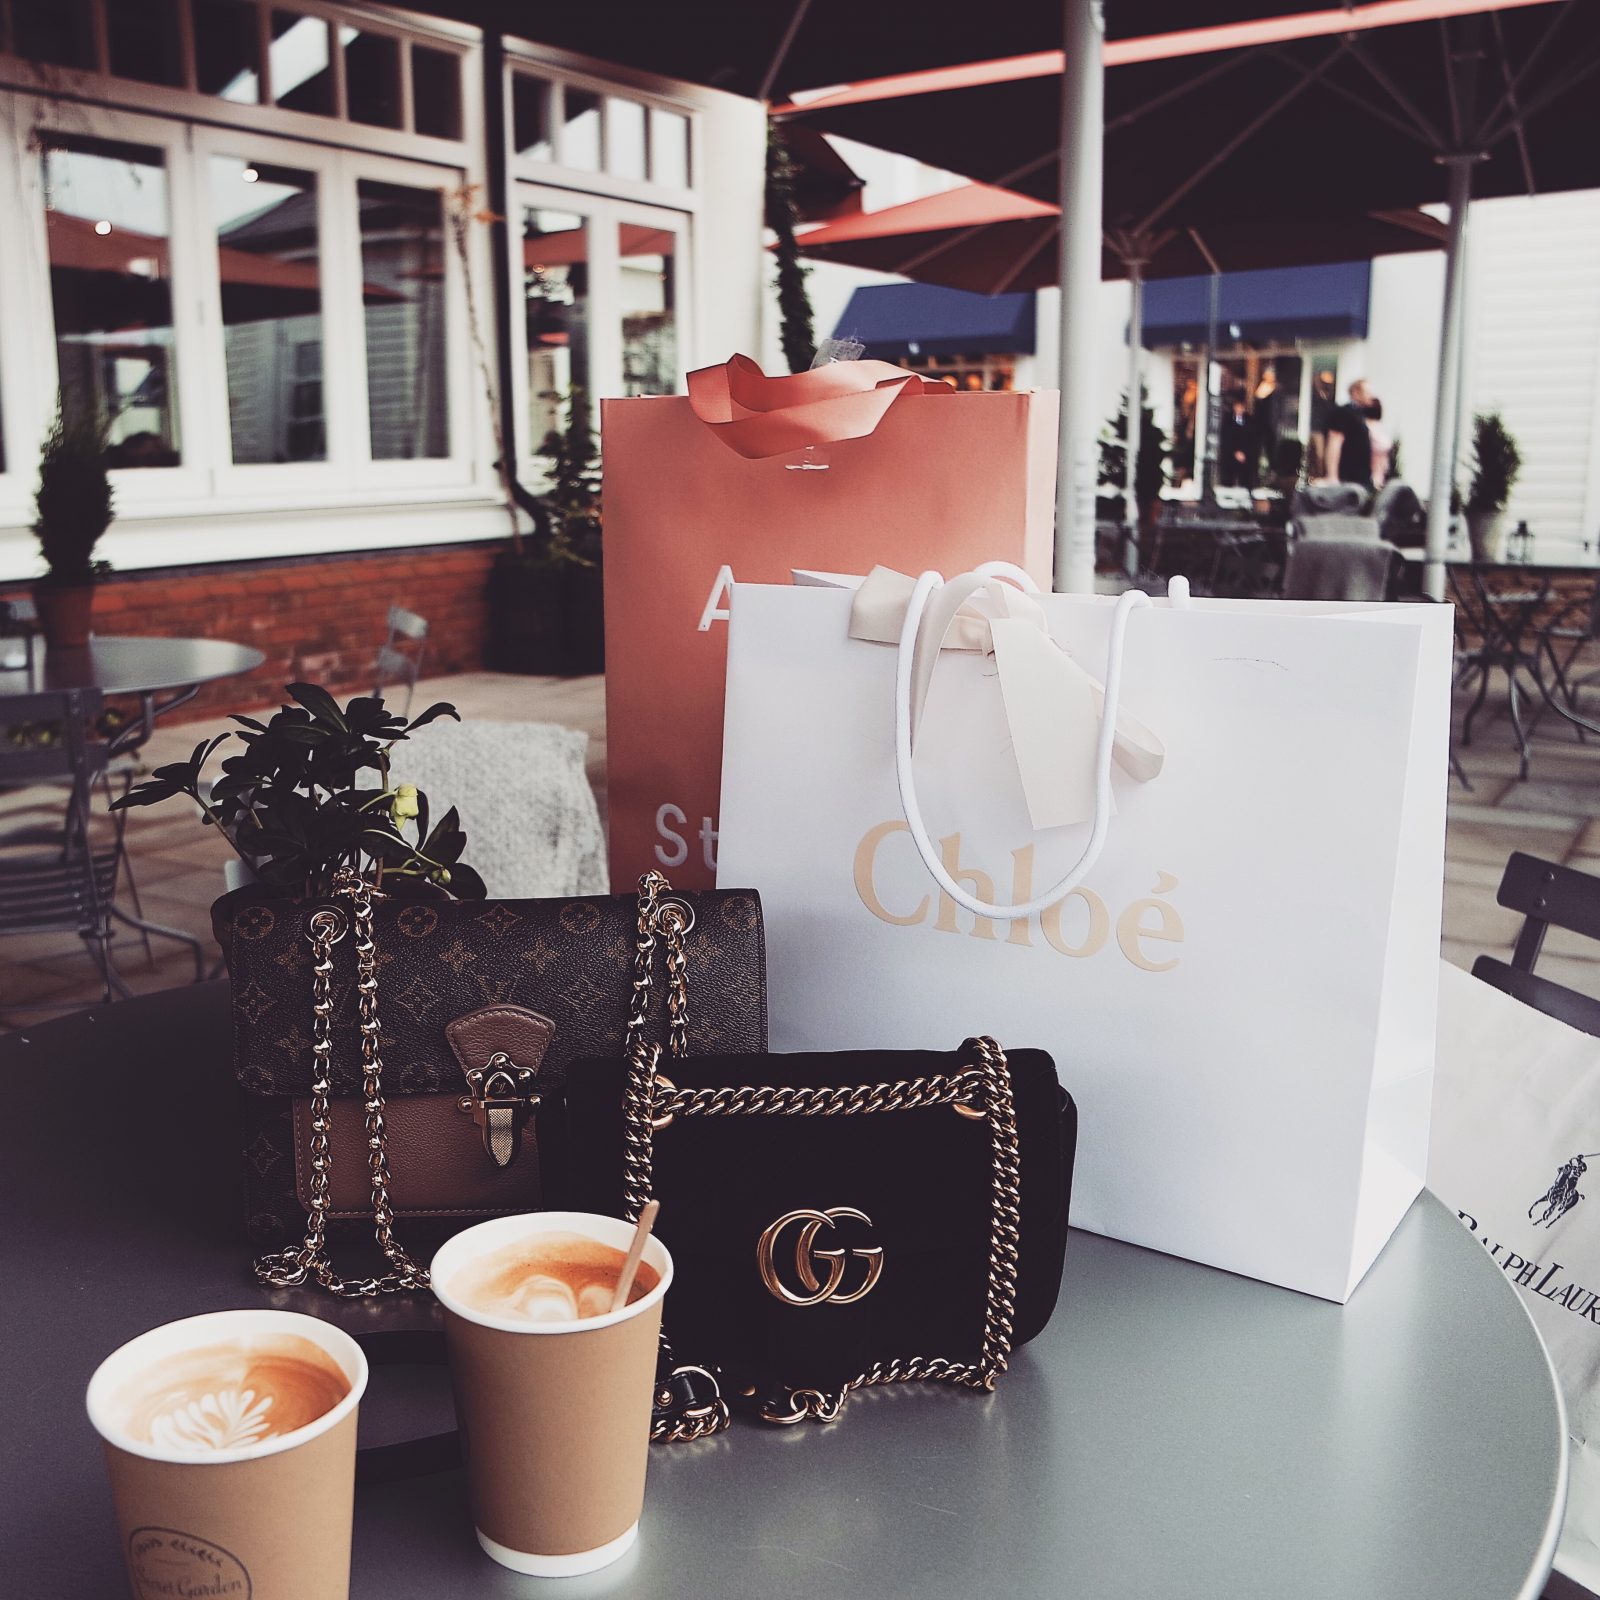 bicester gucci store